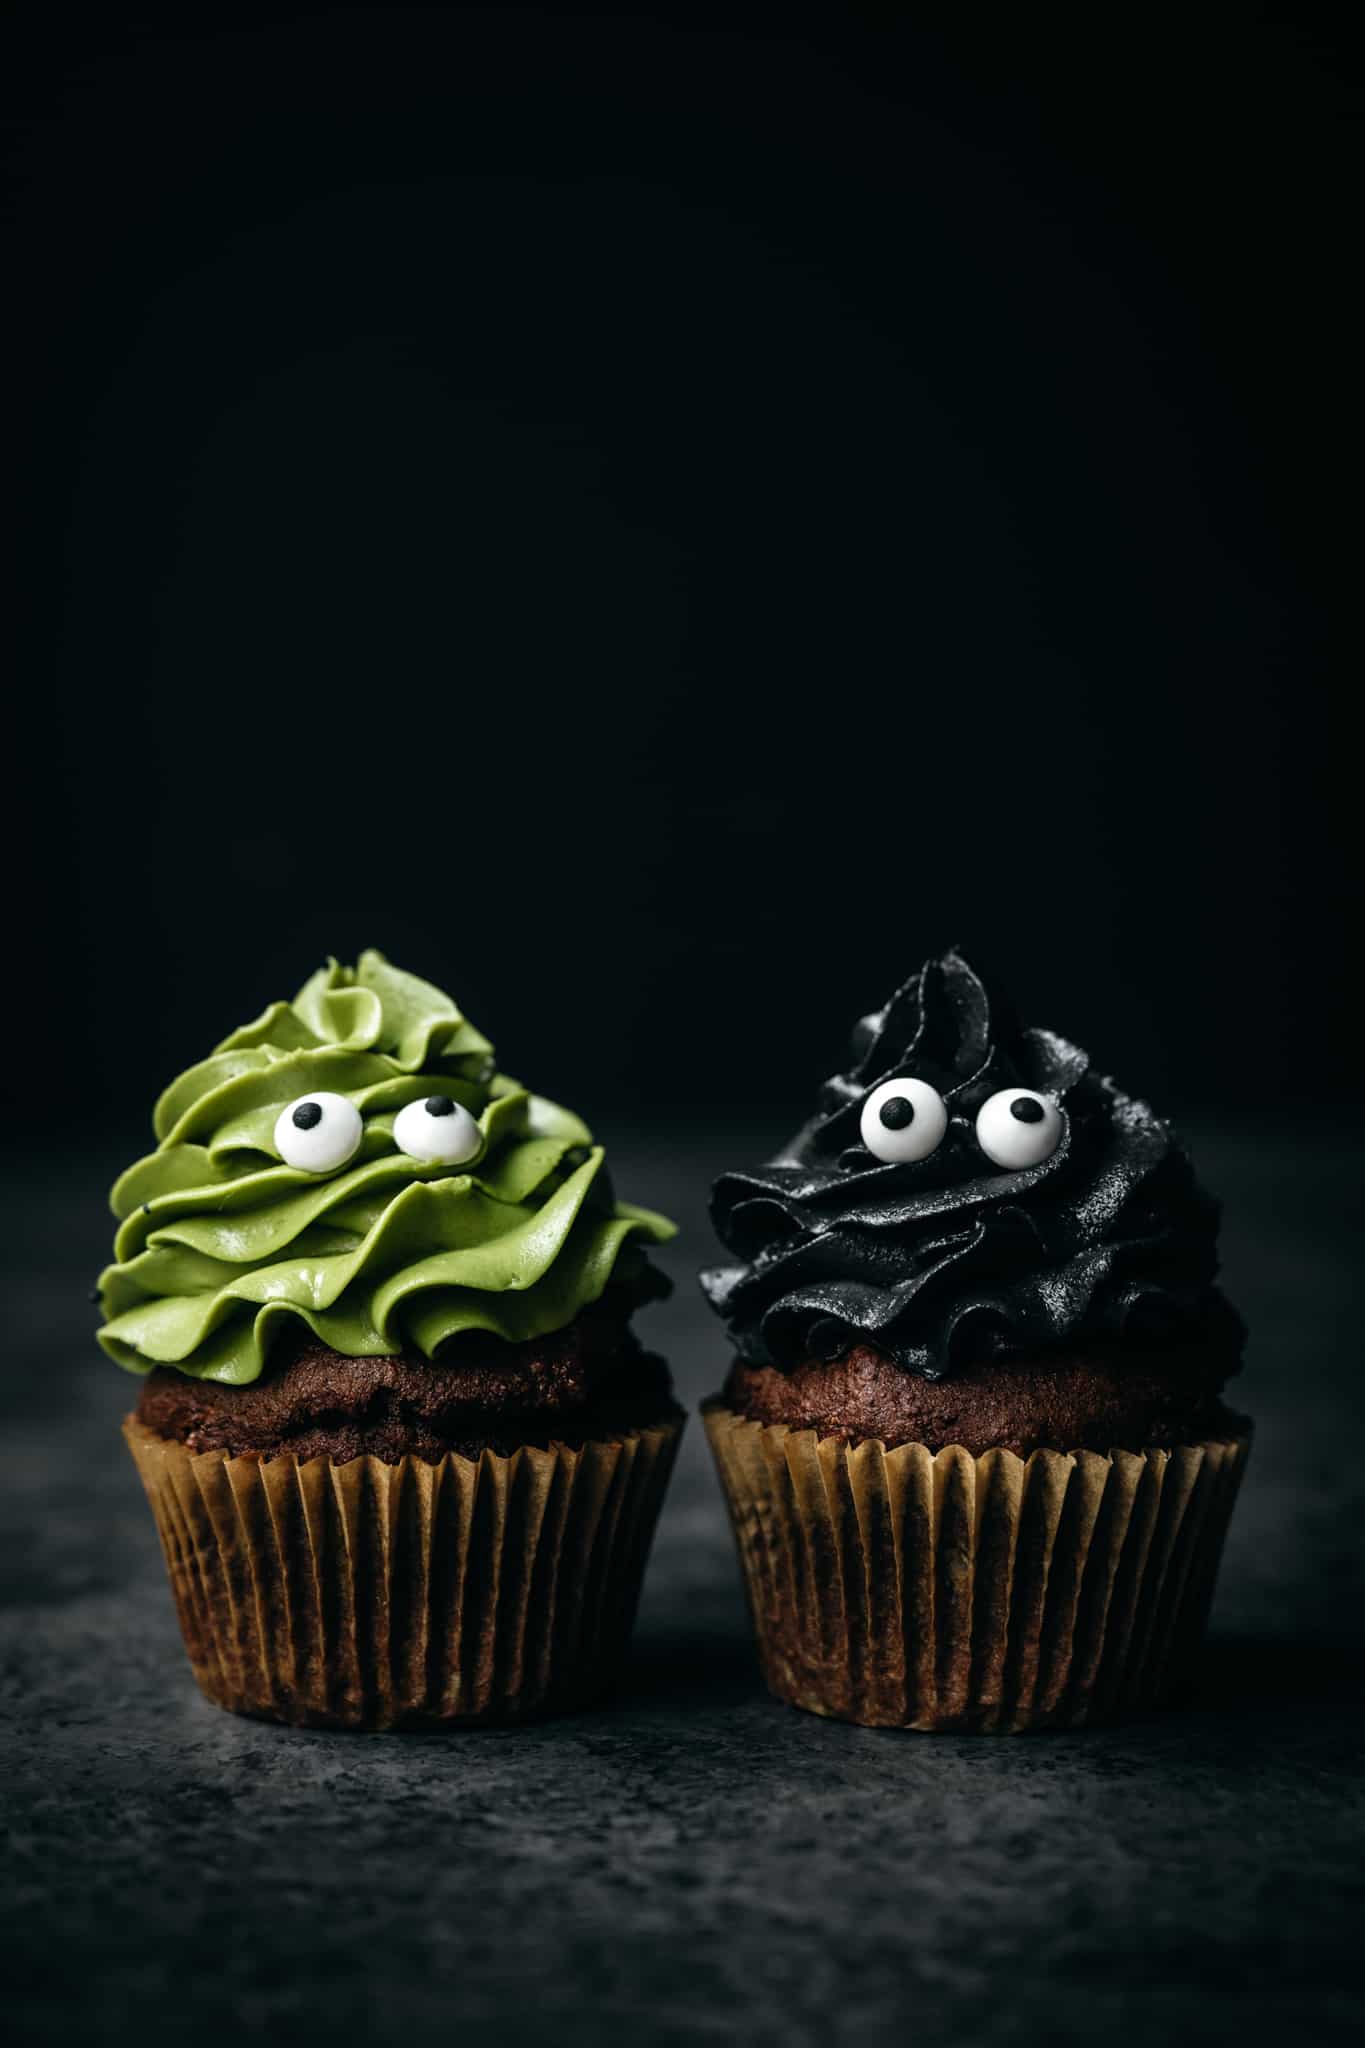 side view of two vegan chocolate cupcakes topped with naturally colored frosting in green and black from charcoal